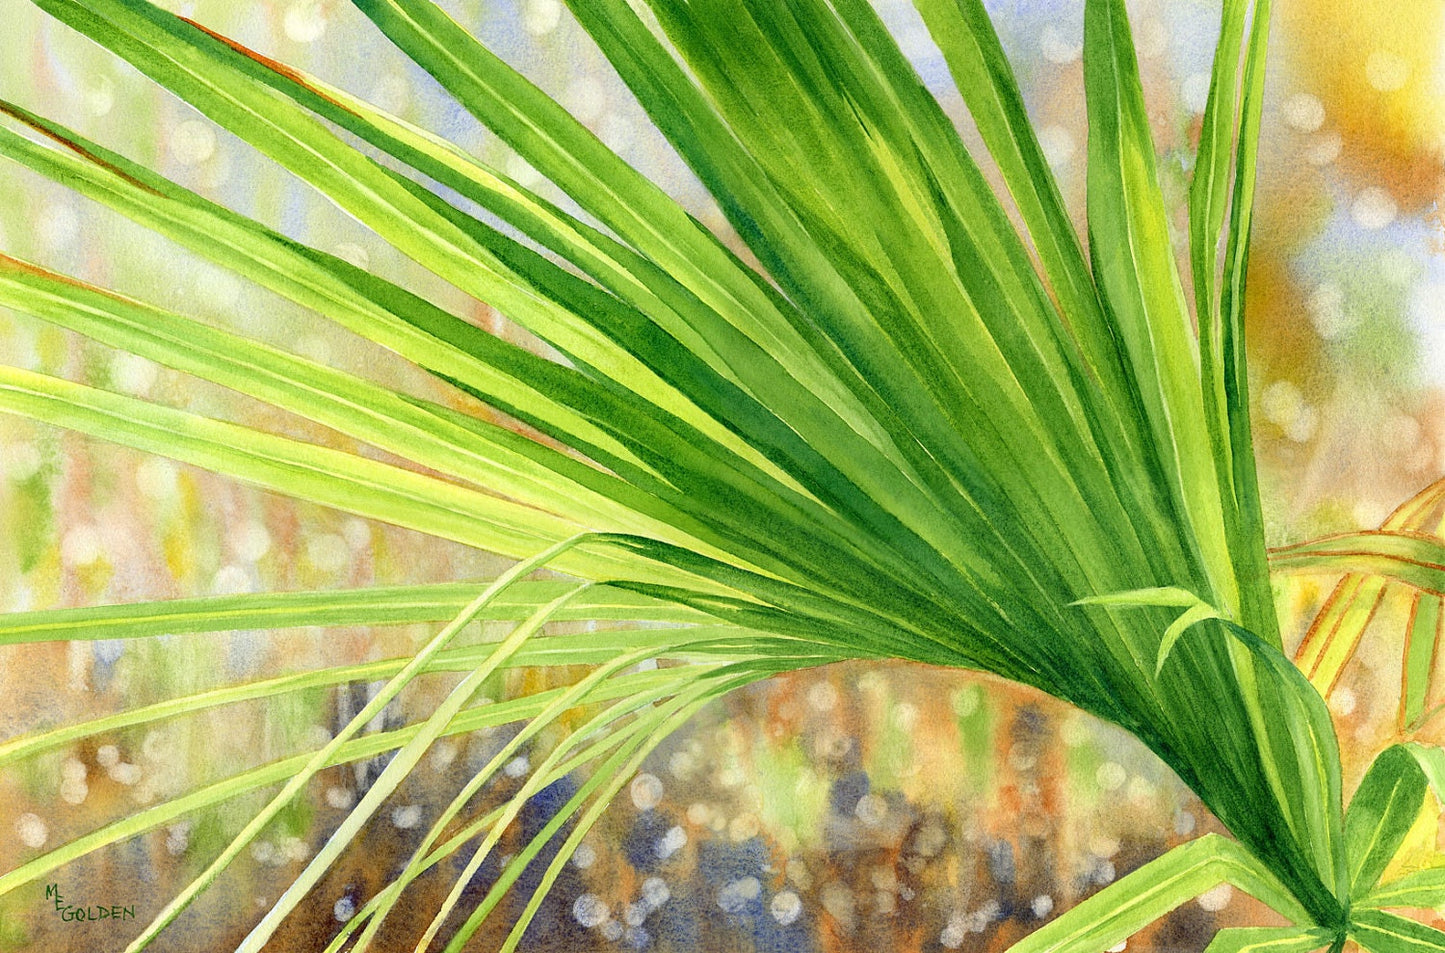 Palm Frond with sunlight shining through